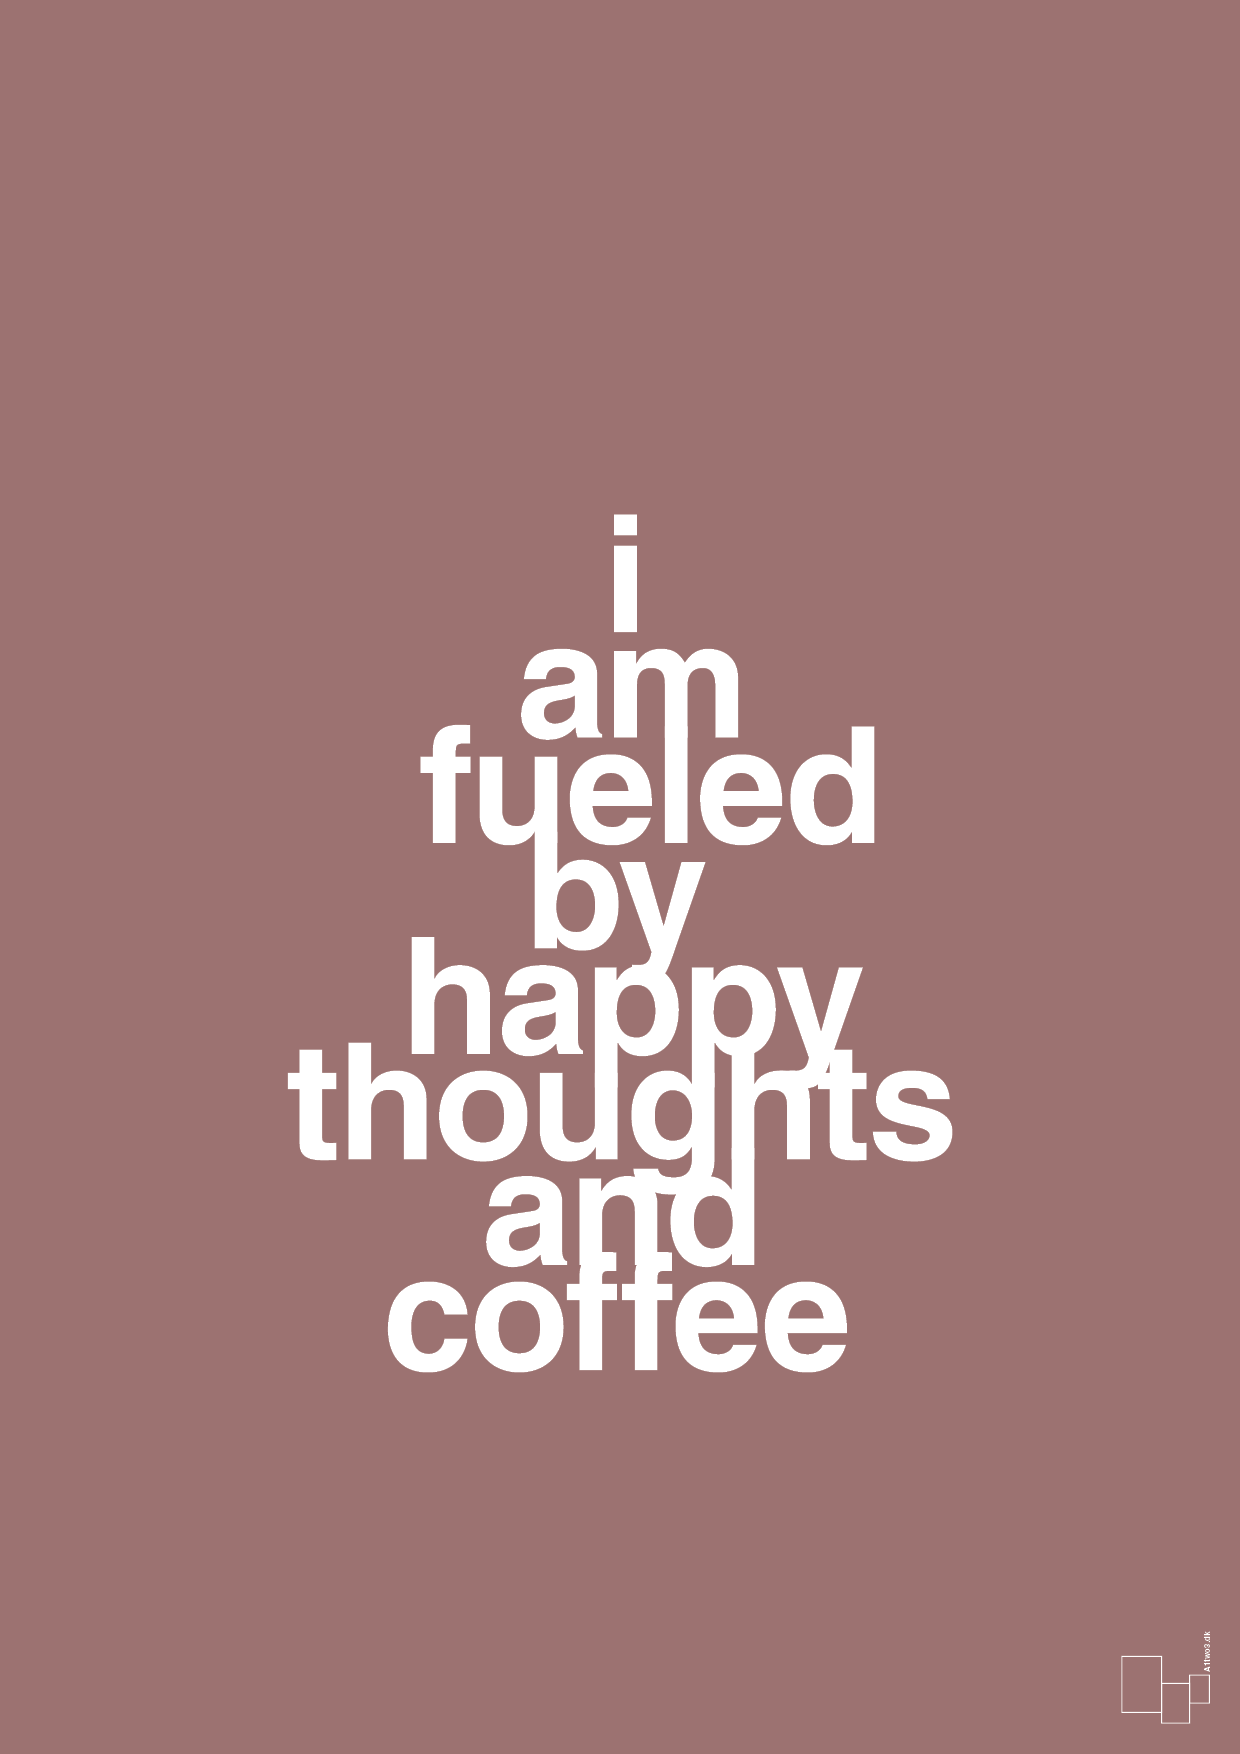 i am fueled by happy thoughts and coffee - Plakat med Mad & Drikke i Plum